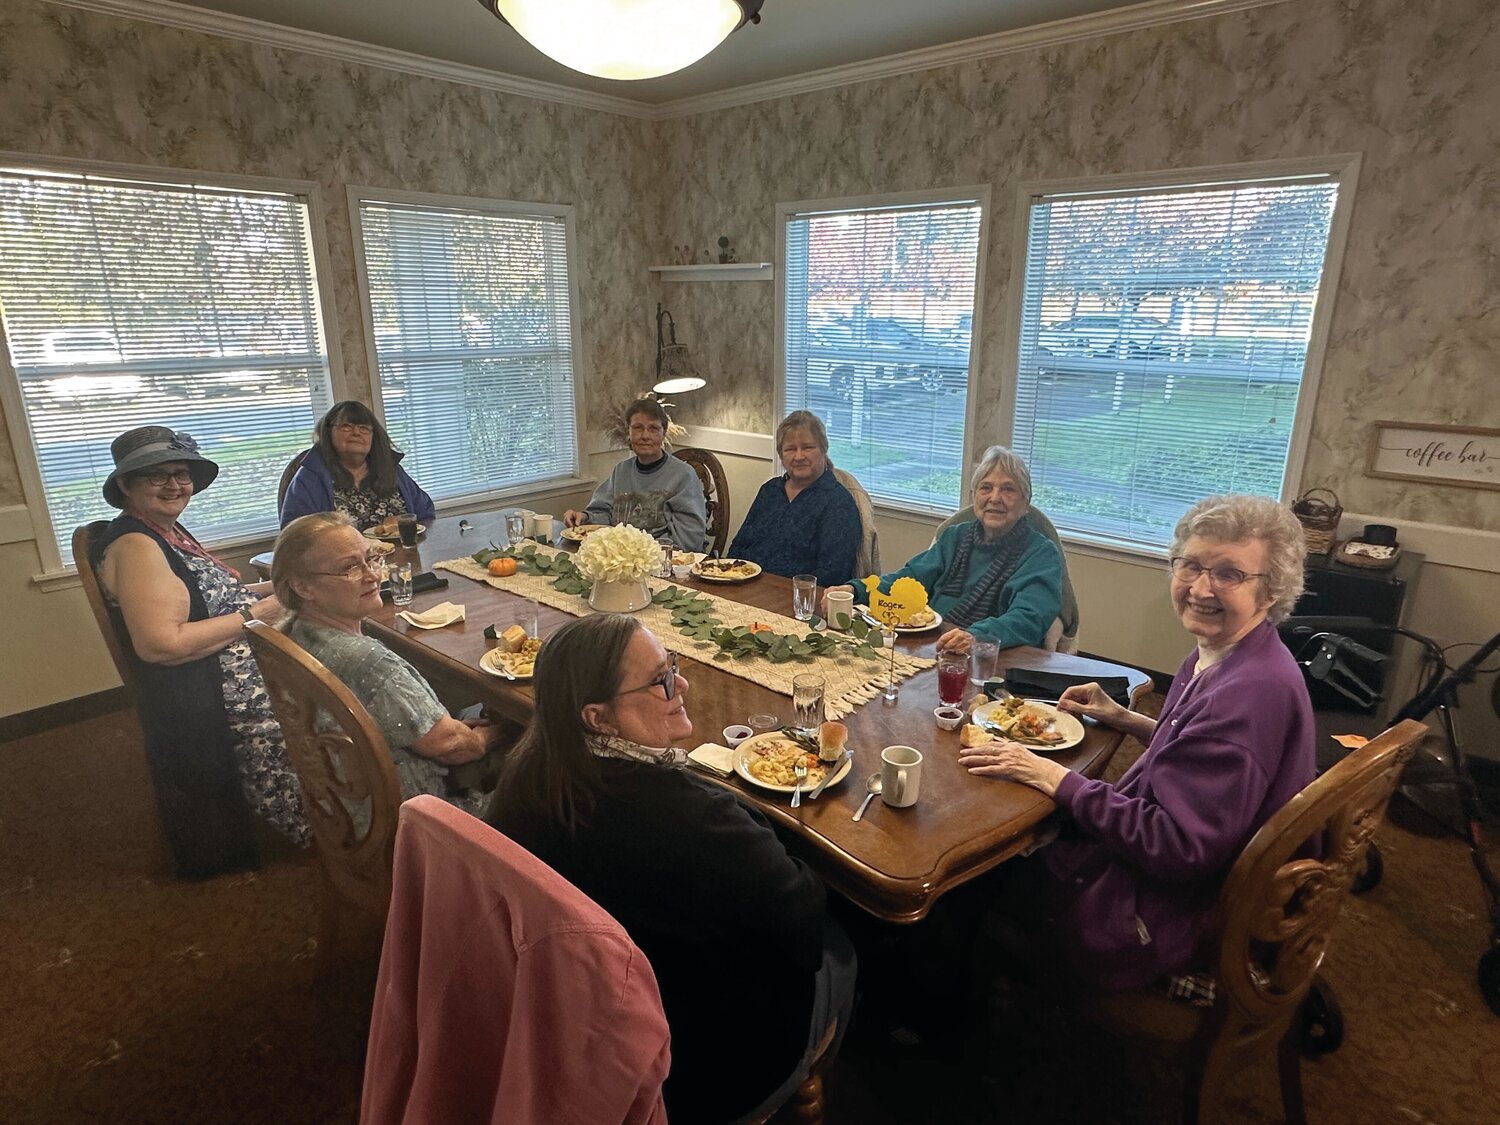 Attendees of Prestige Senior Living Rosemont’s Thanksgiving luncheon smile as they enjoy a traditional Thanksgiving meal on Nov. 17.